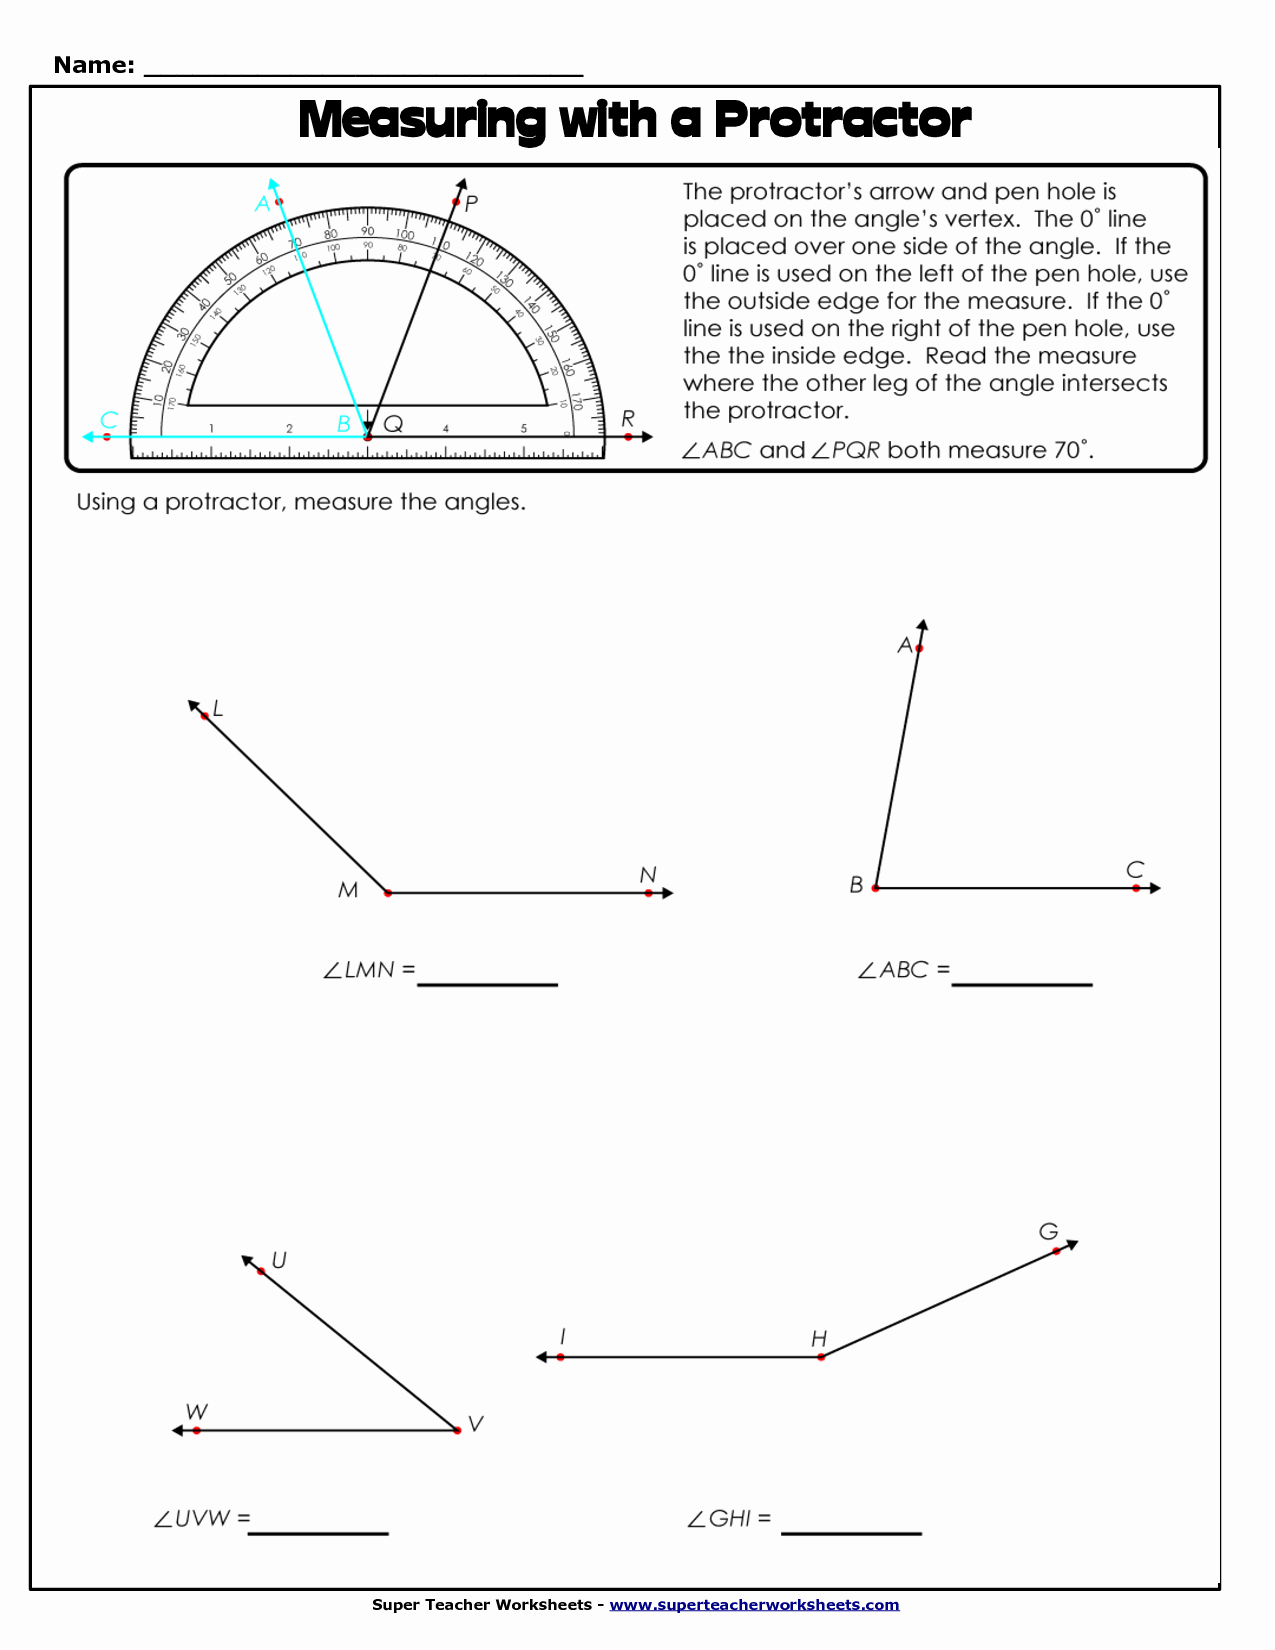 Pairs Of Angles Worksheet Answers Inspirational Pairs Angles Worksheet Answers